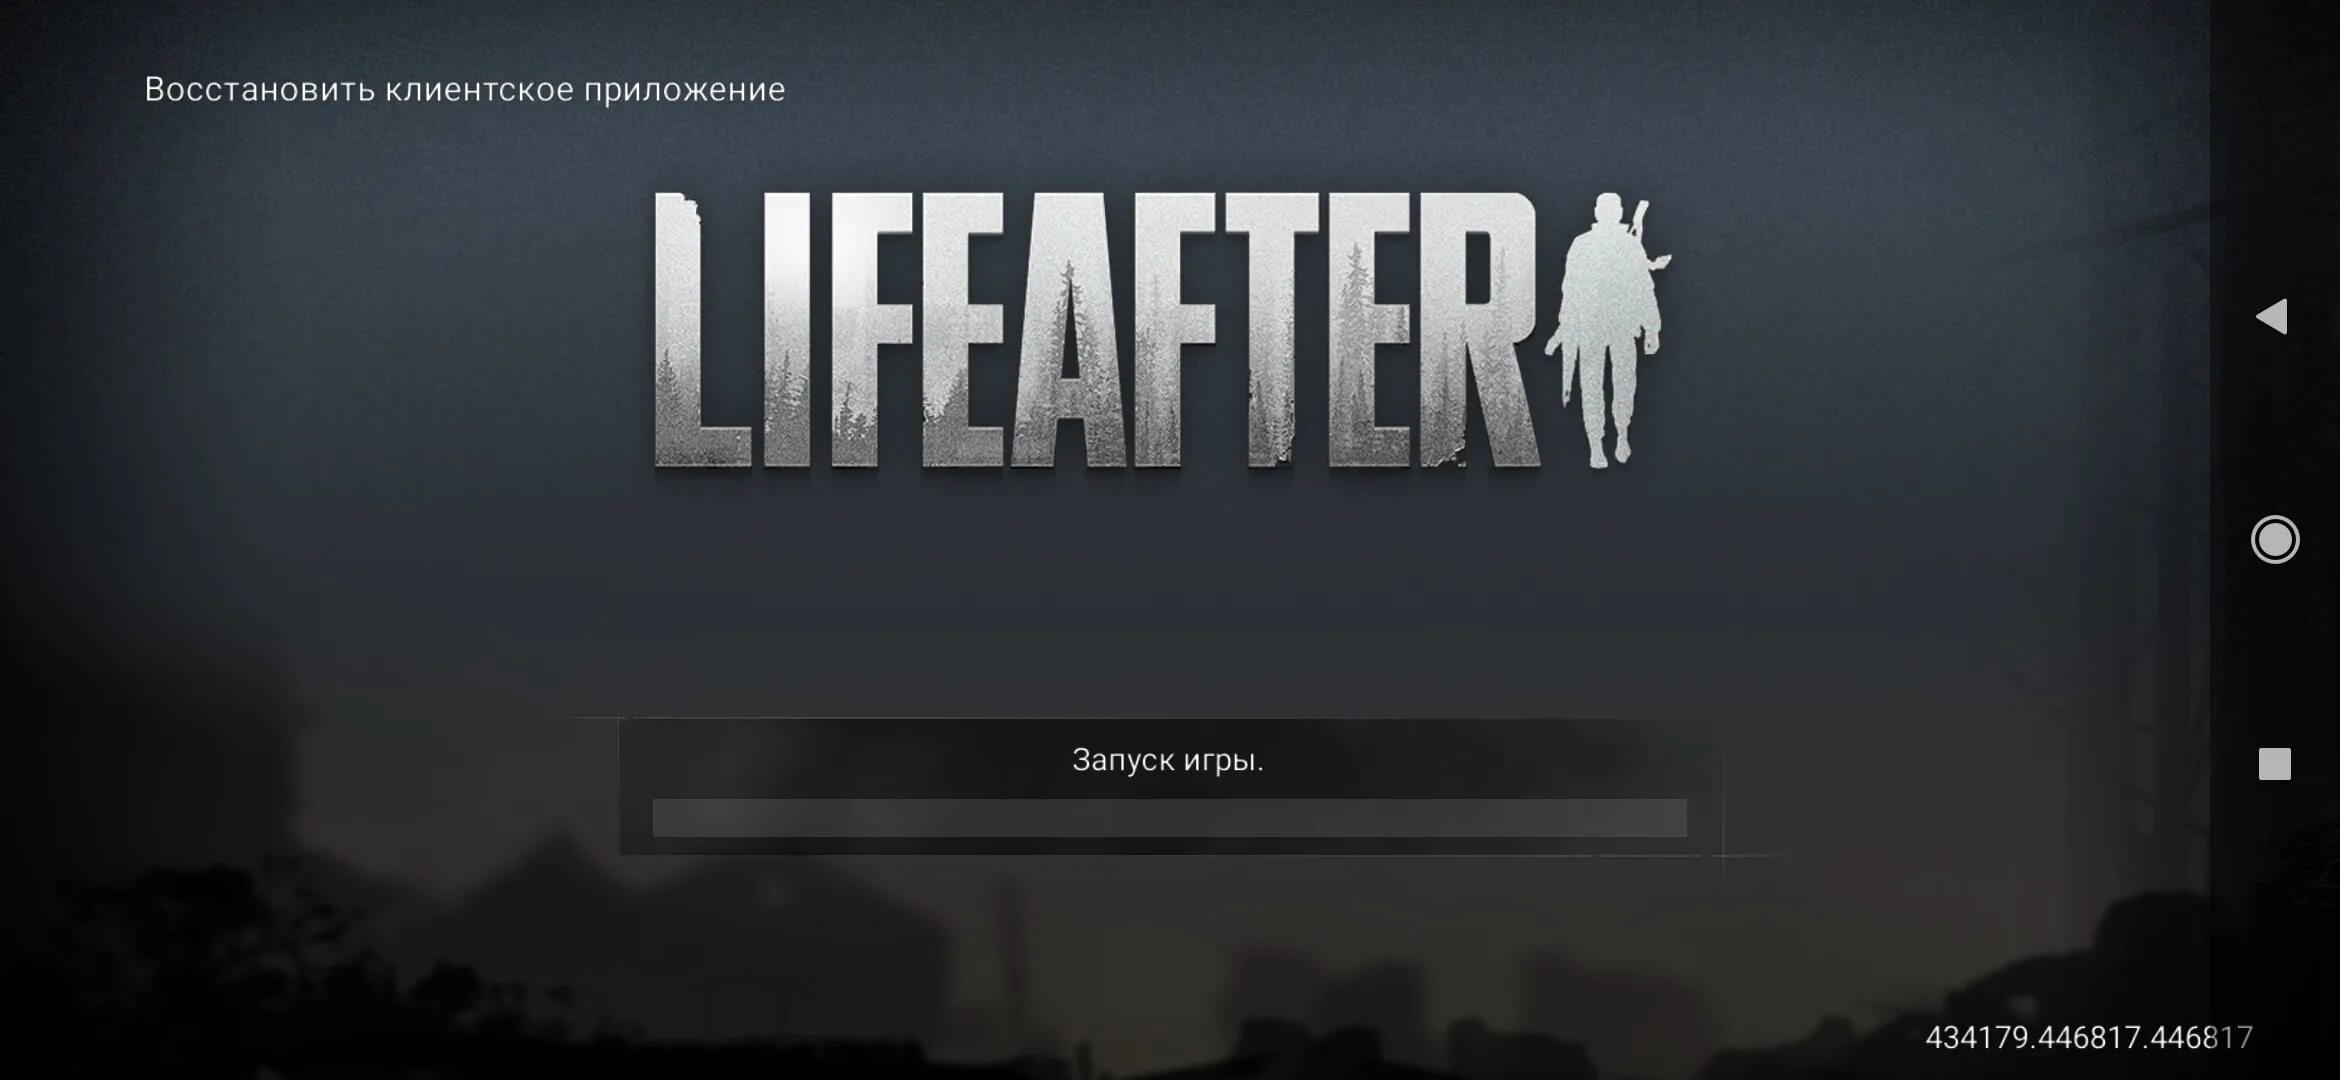 Launch client. Life after логотип. Лифеафтер игра. Life after обои. Life after: Night Falls логотип.